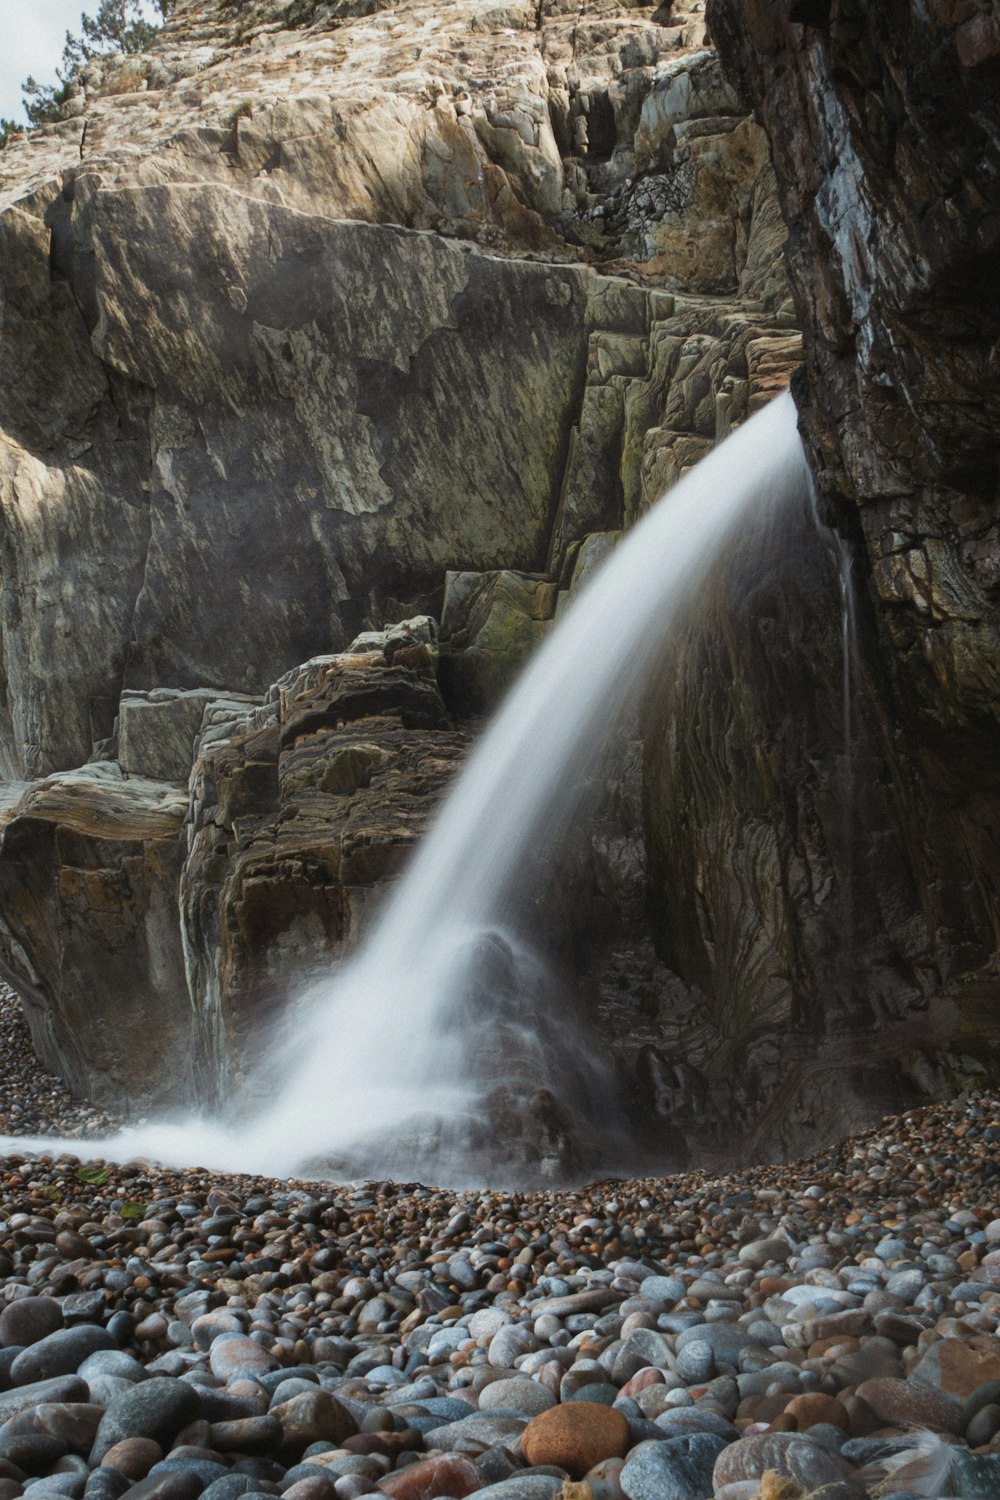 a small waterfall spewing water into a rocky area